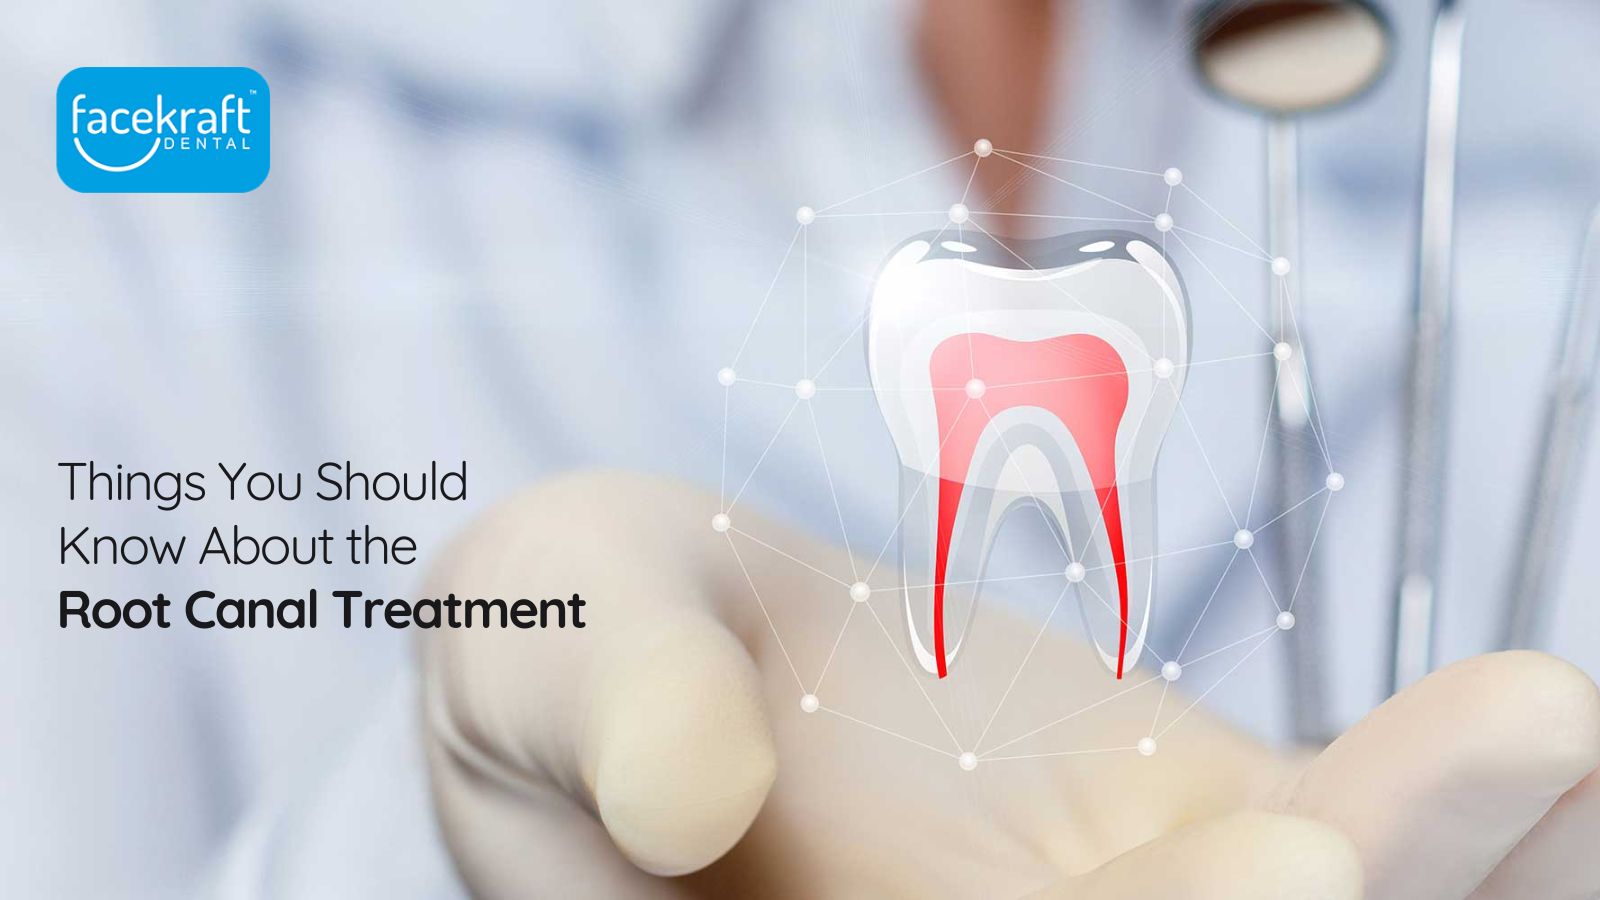 Things You Should Know About the Root Canal Treatment